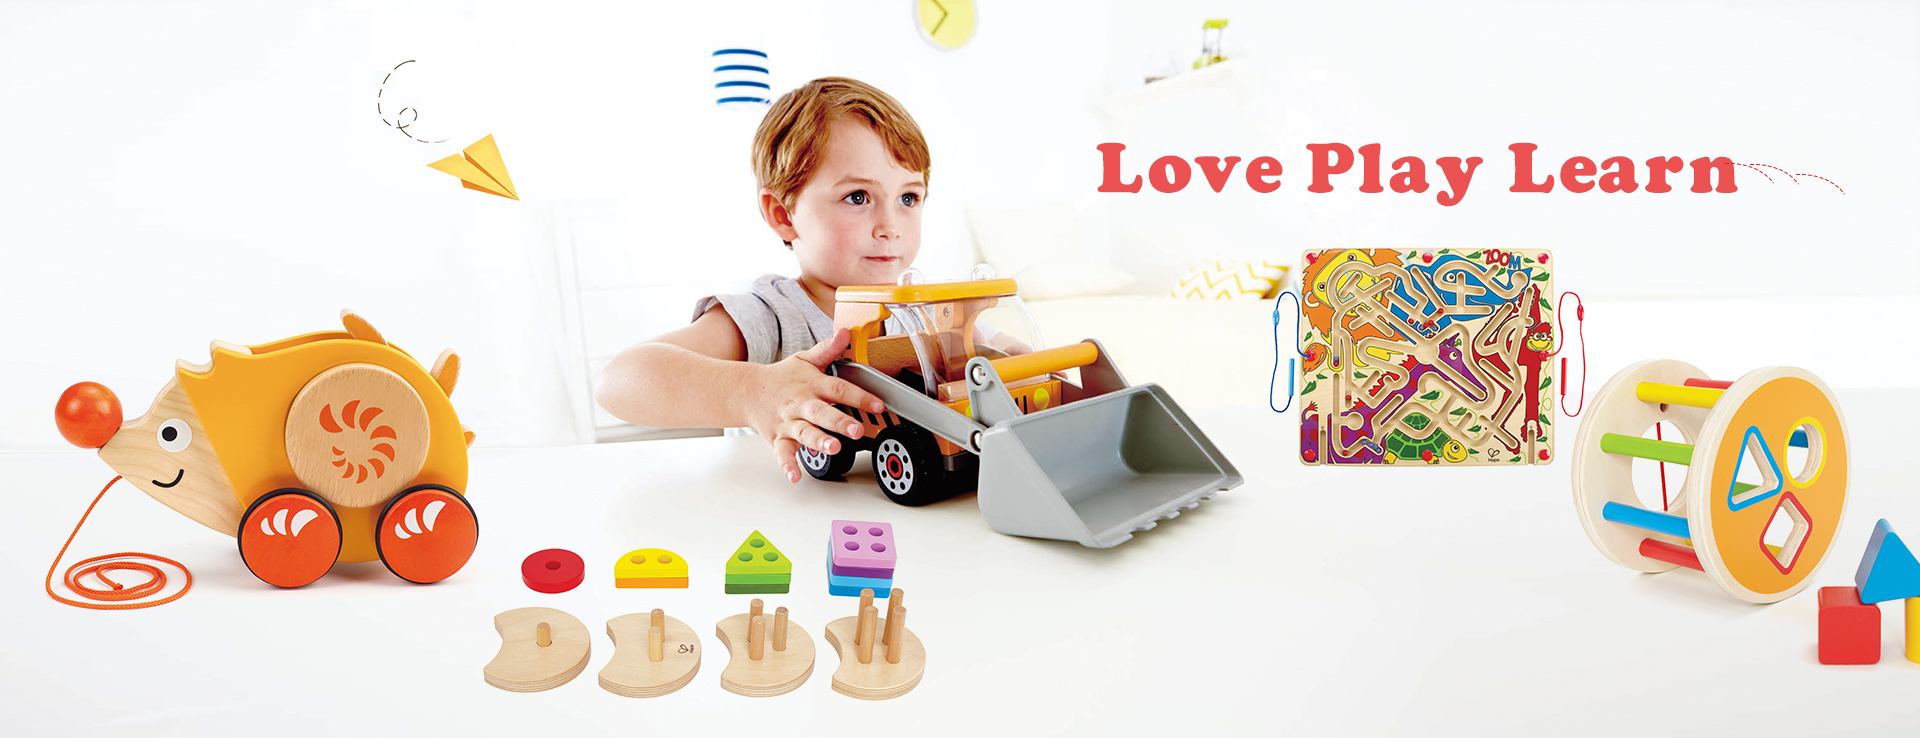 Kitchen Toys, Wooden Toys, Educational Toys Kids - Happy Arts & Crafts